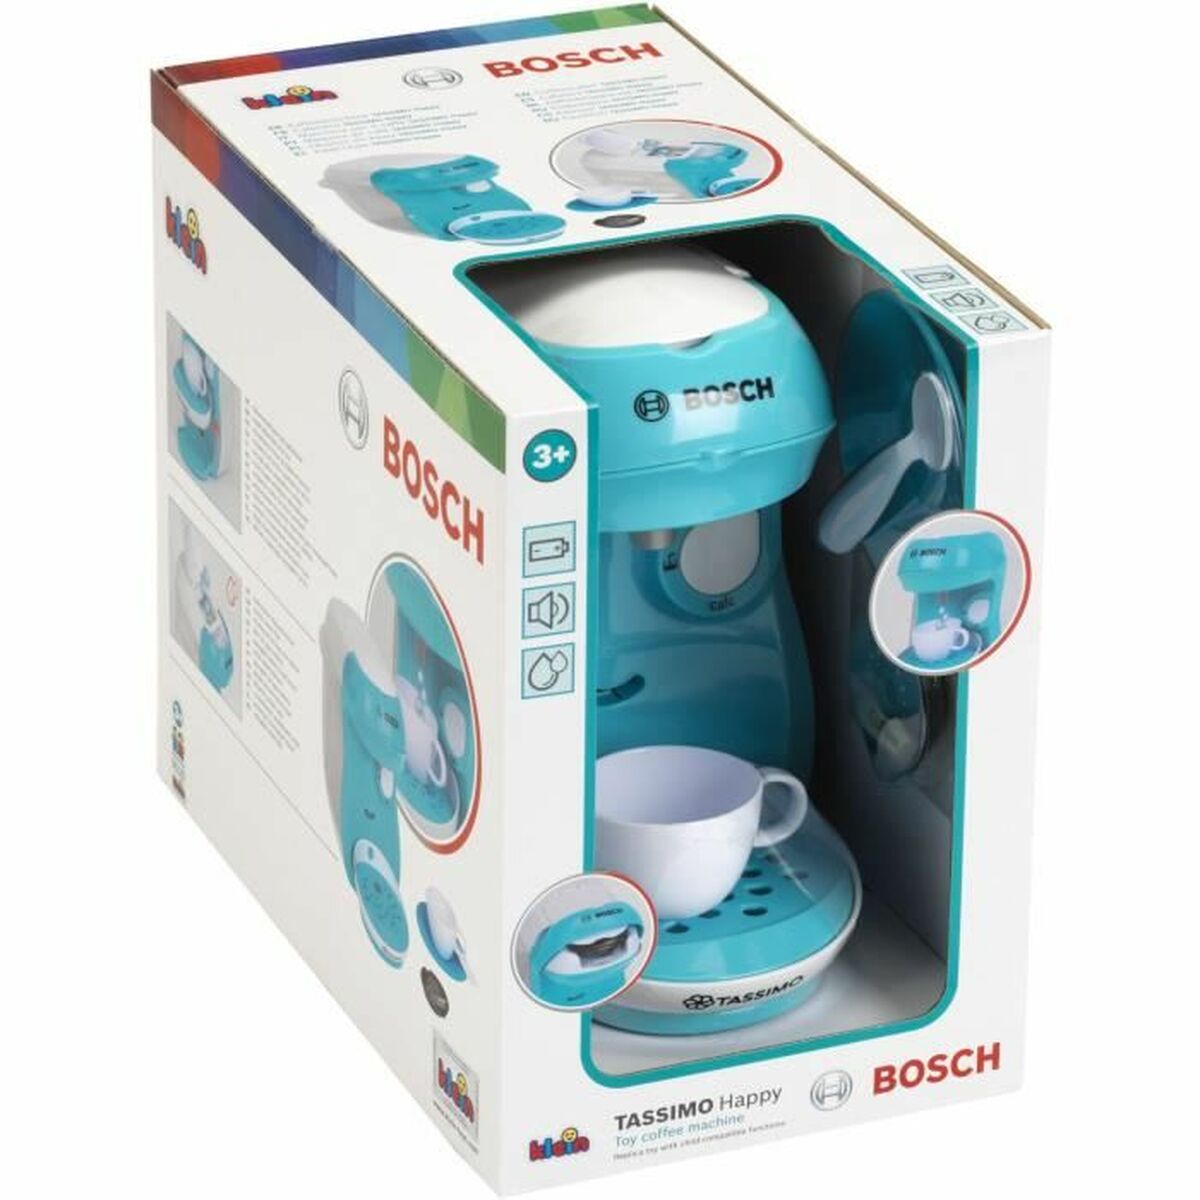 Toy Appliance Klein Bosch + 3 years Accessories Electric Coffee-maker